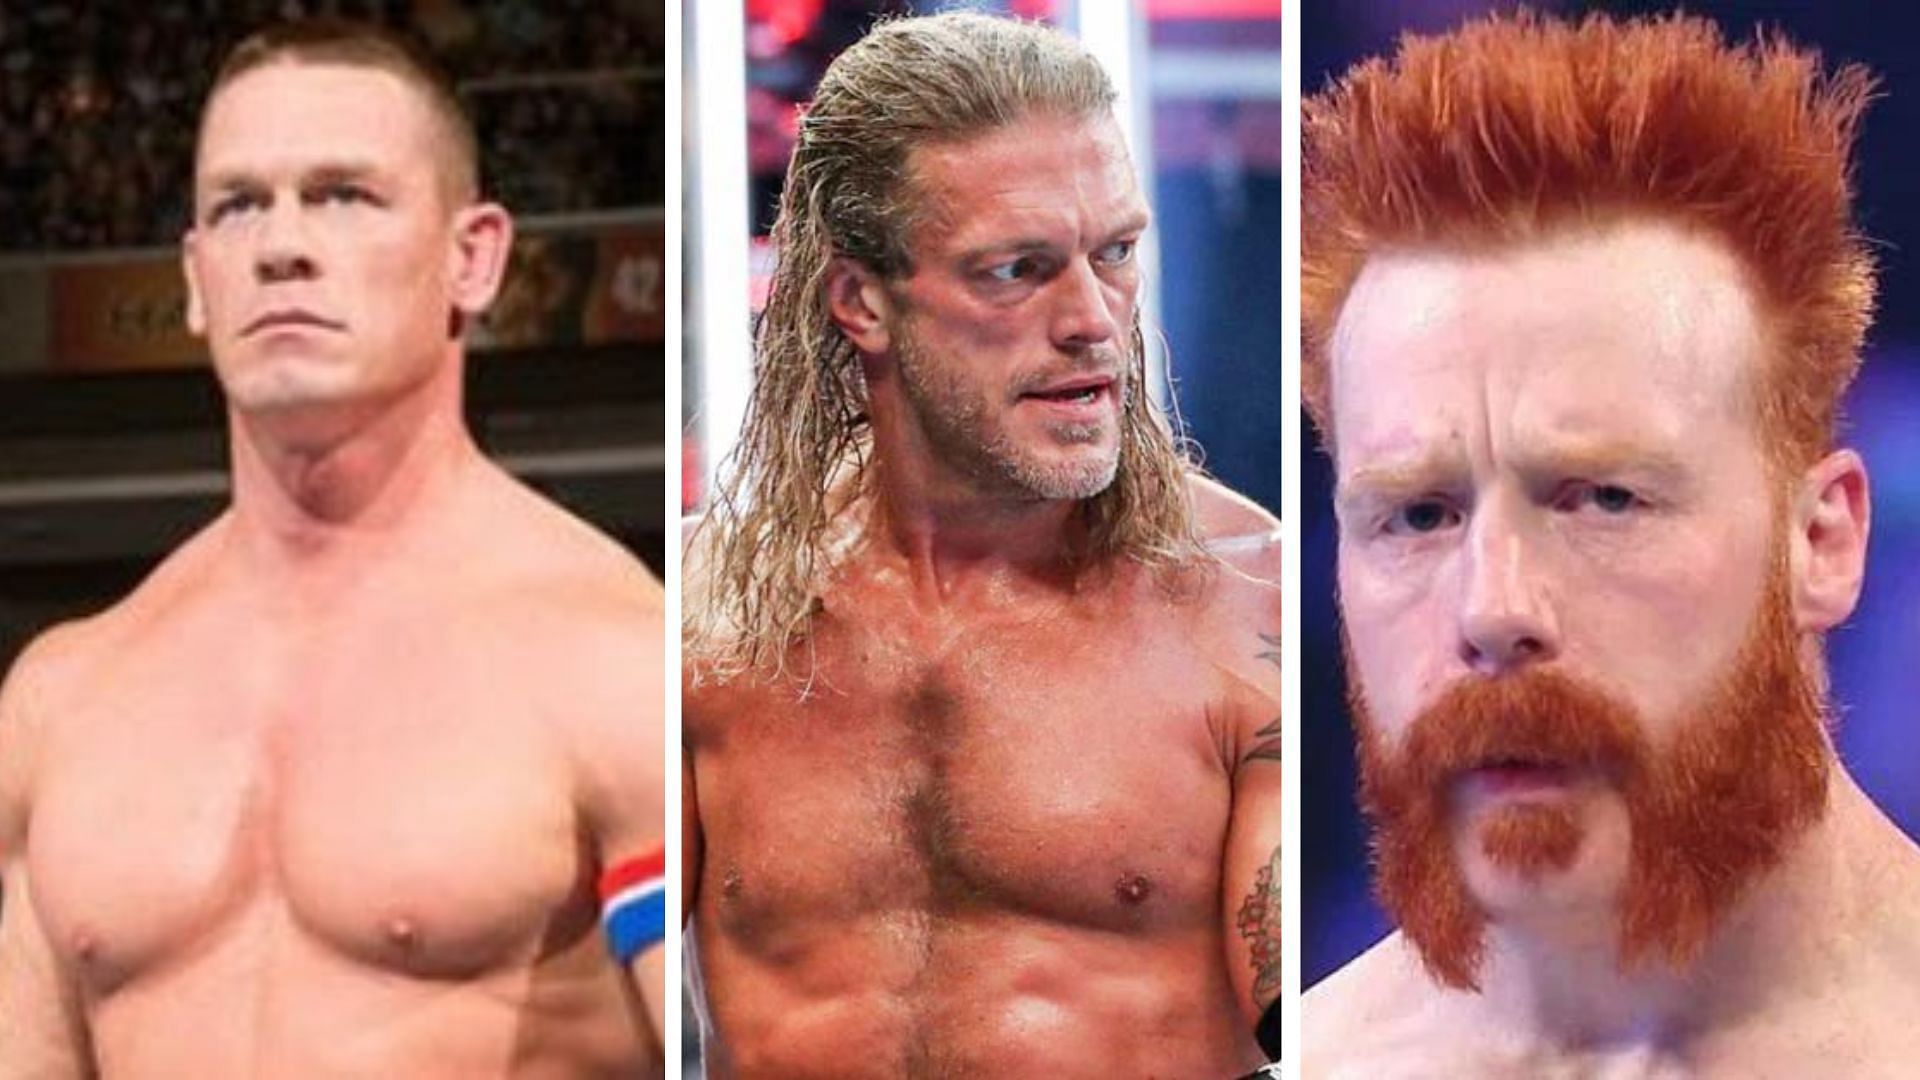 John Cena on left, Edge in the middle, Sheamus on right